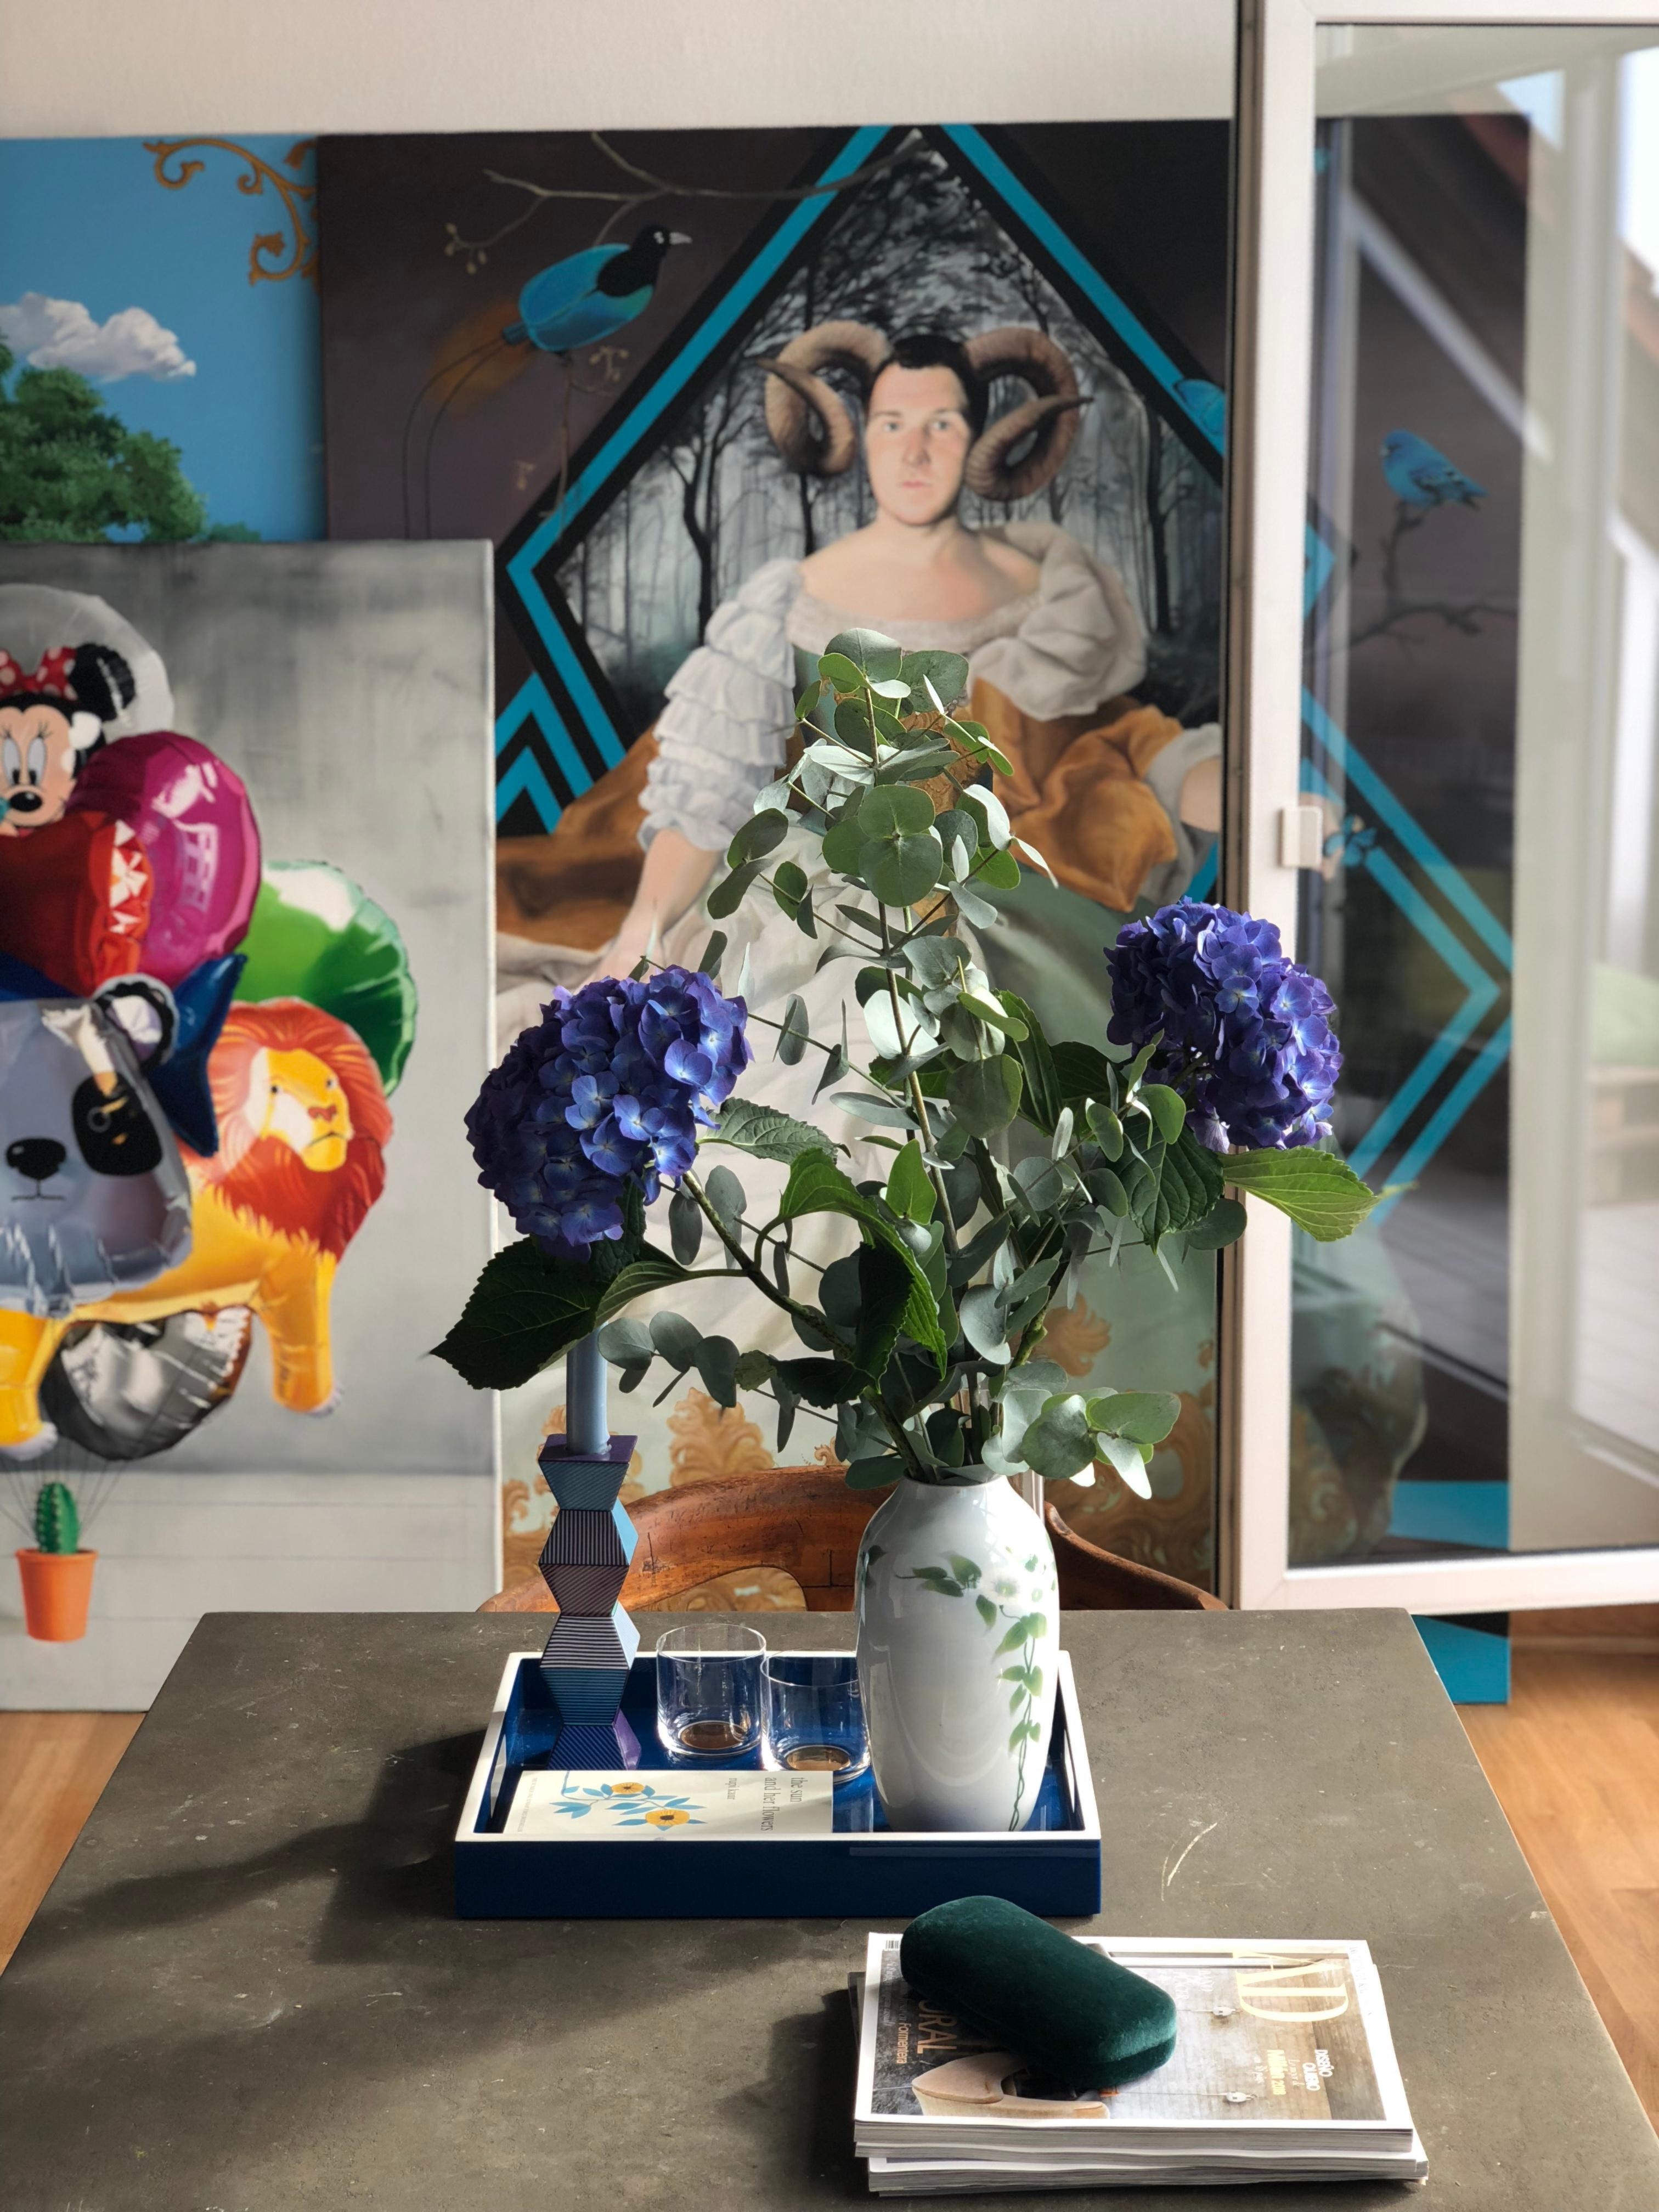 Flower Power and Colorful Art in our Berlin home. #interior #flower #table